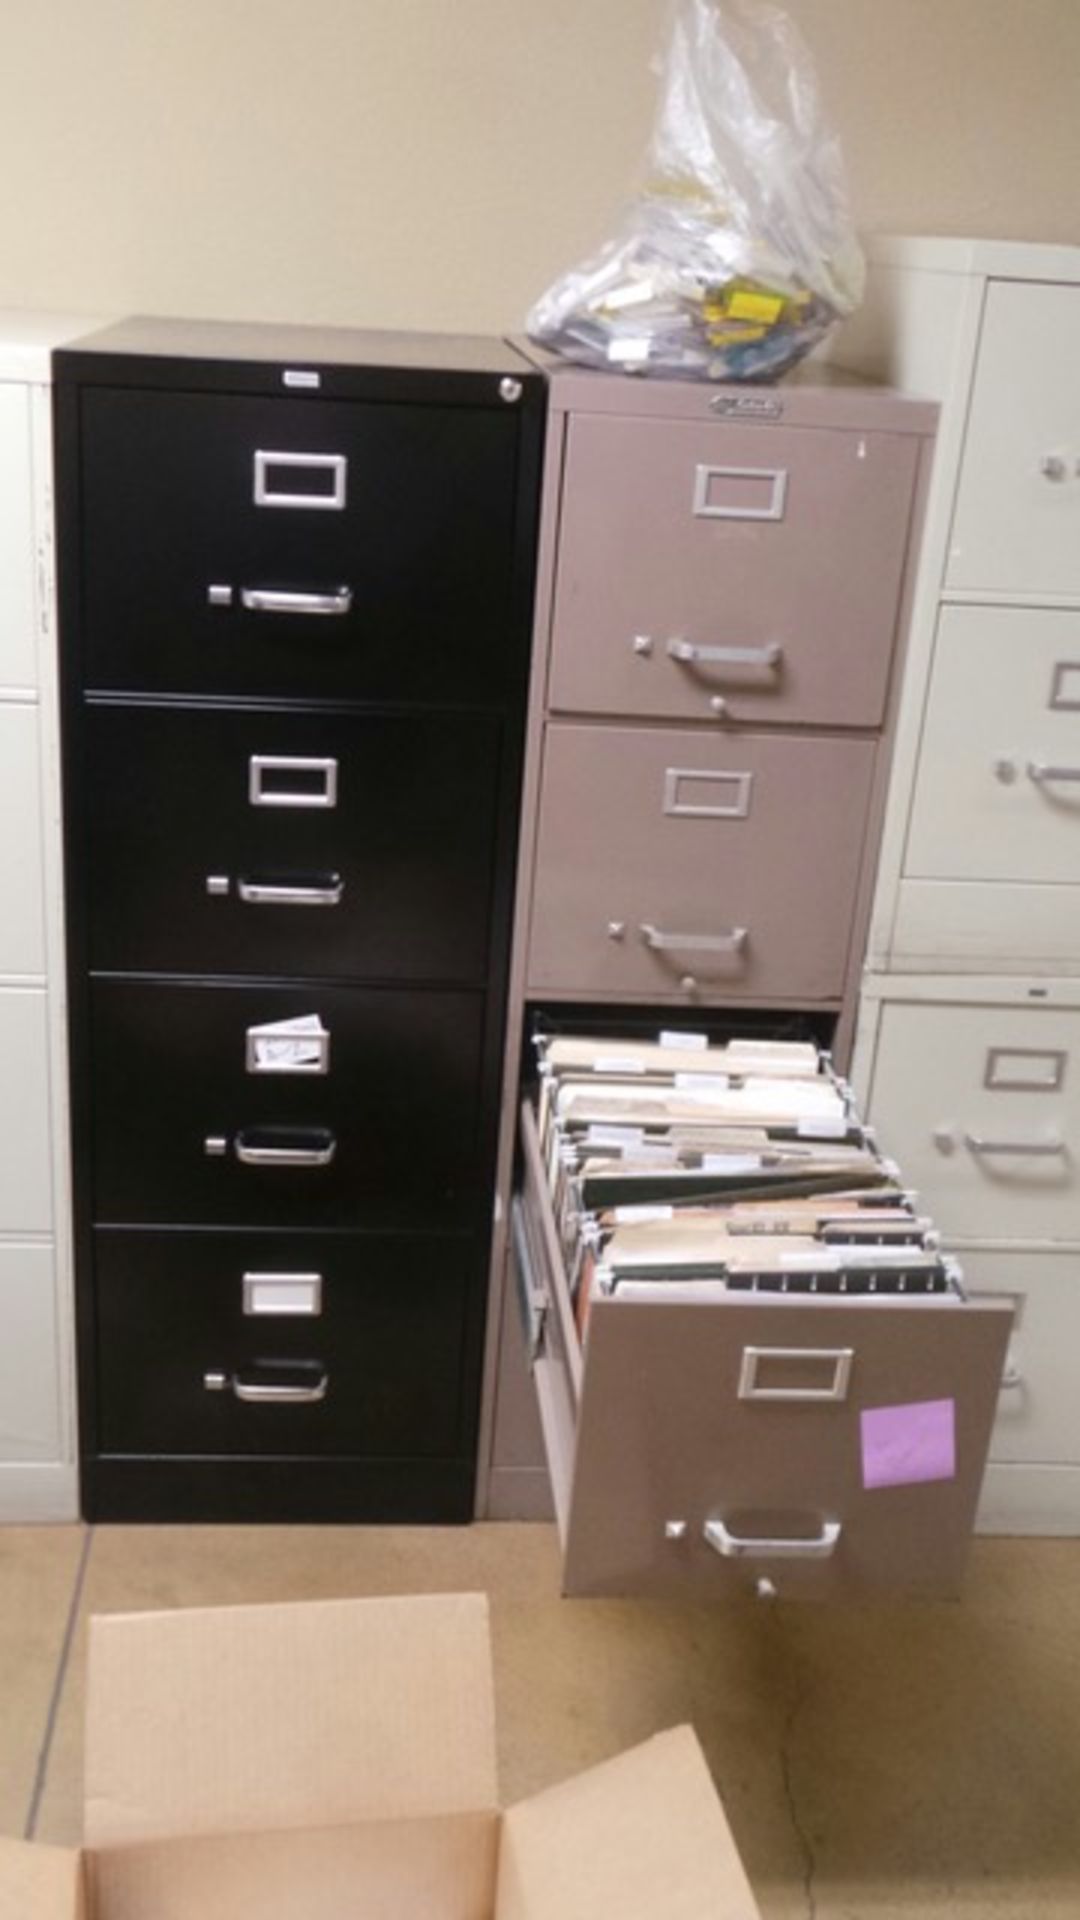 File Cabinets - Image 10 of 11